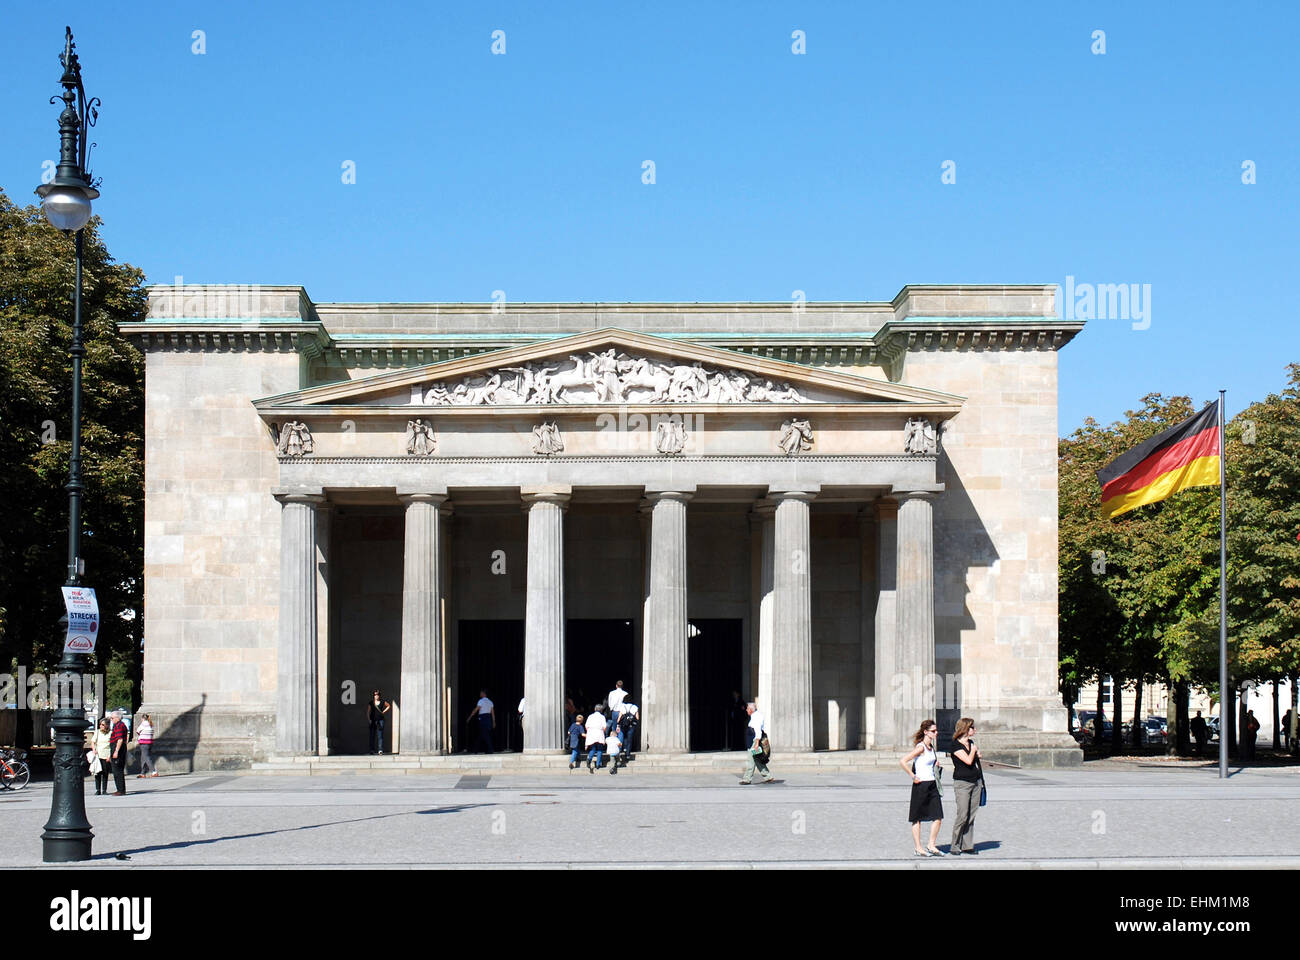 New Guardhouse in Berlin - Central Memorial of the Federal Republic of Germany for the Victims of War and Dictatorship. Stock Photo